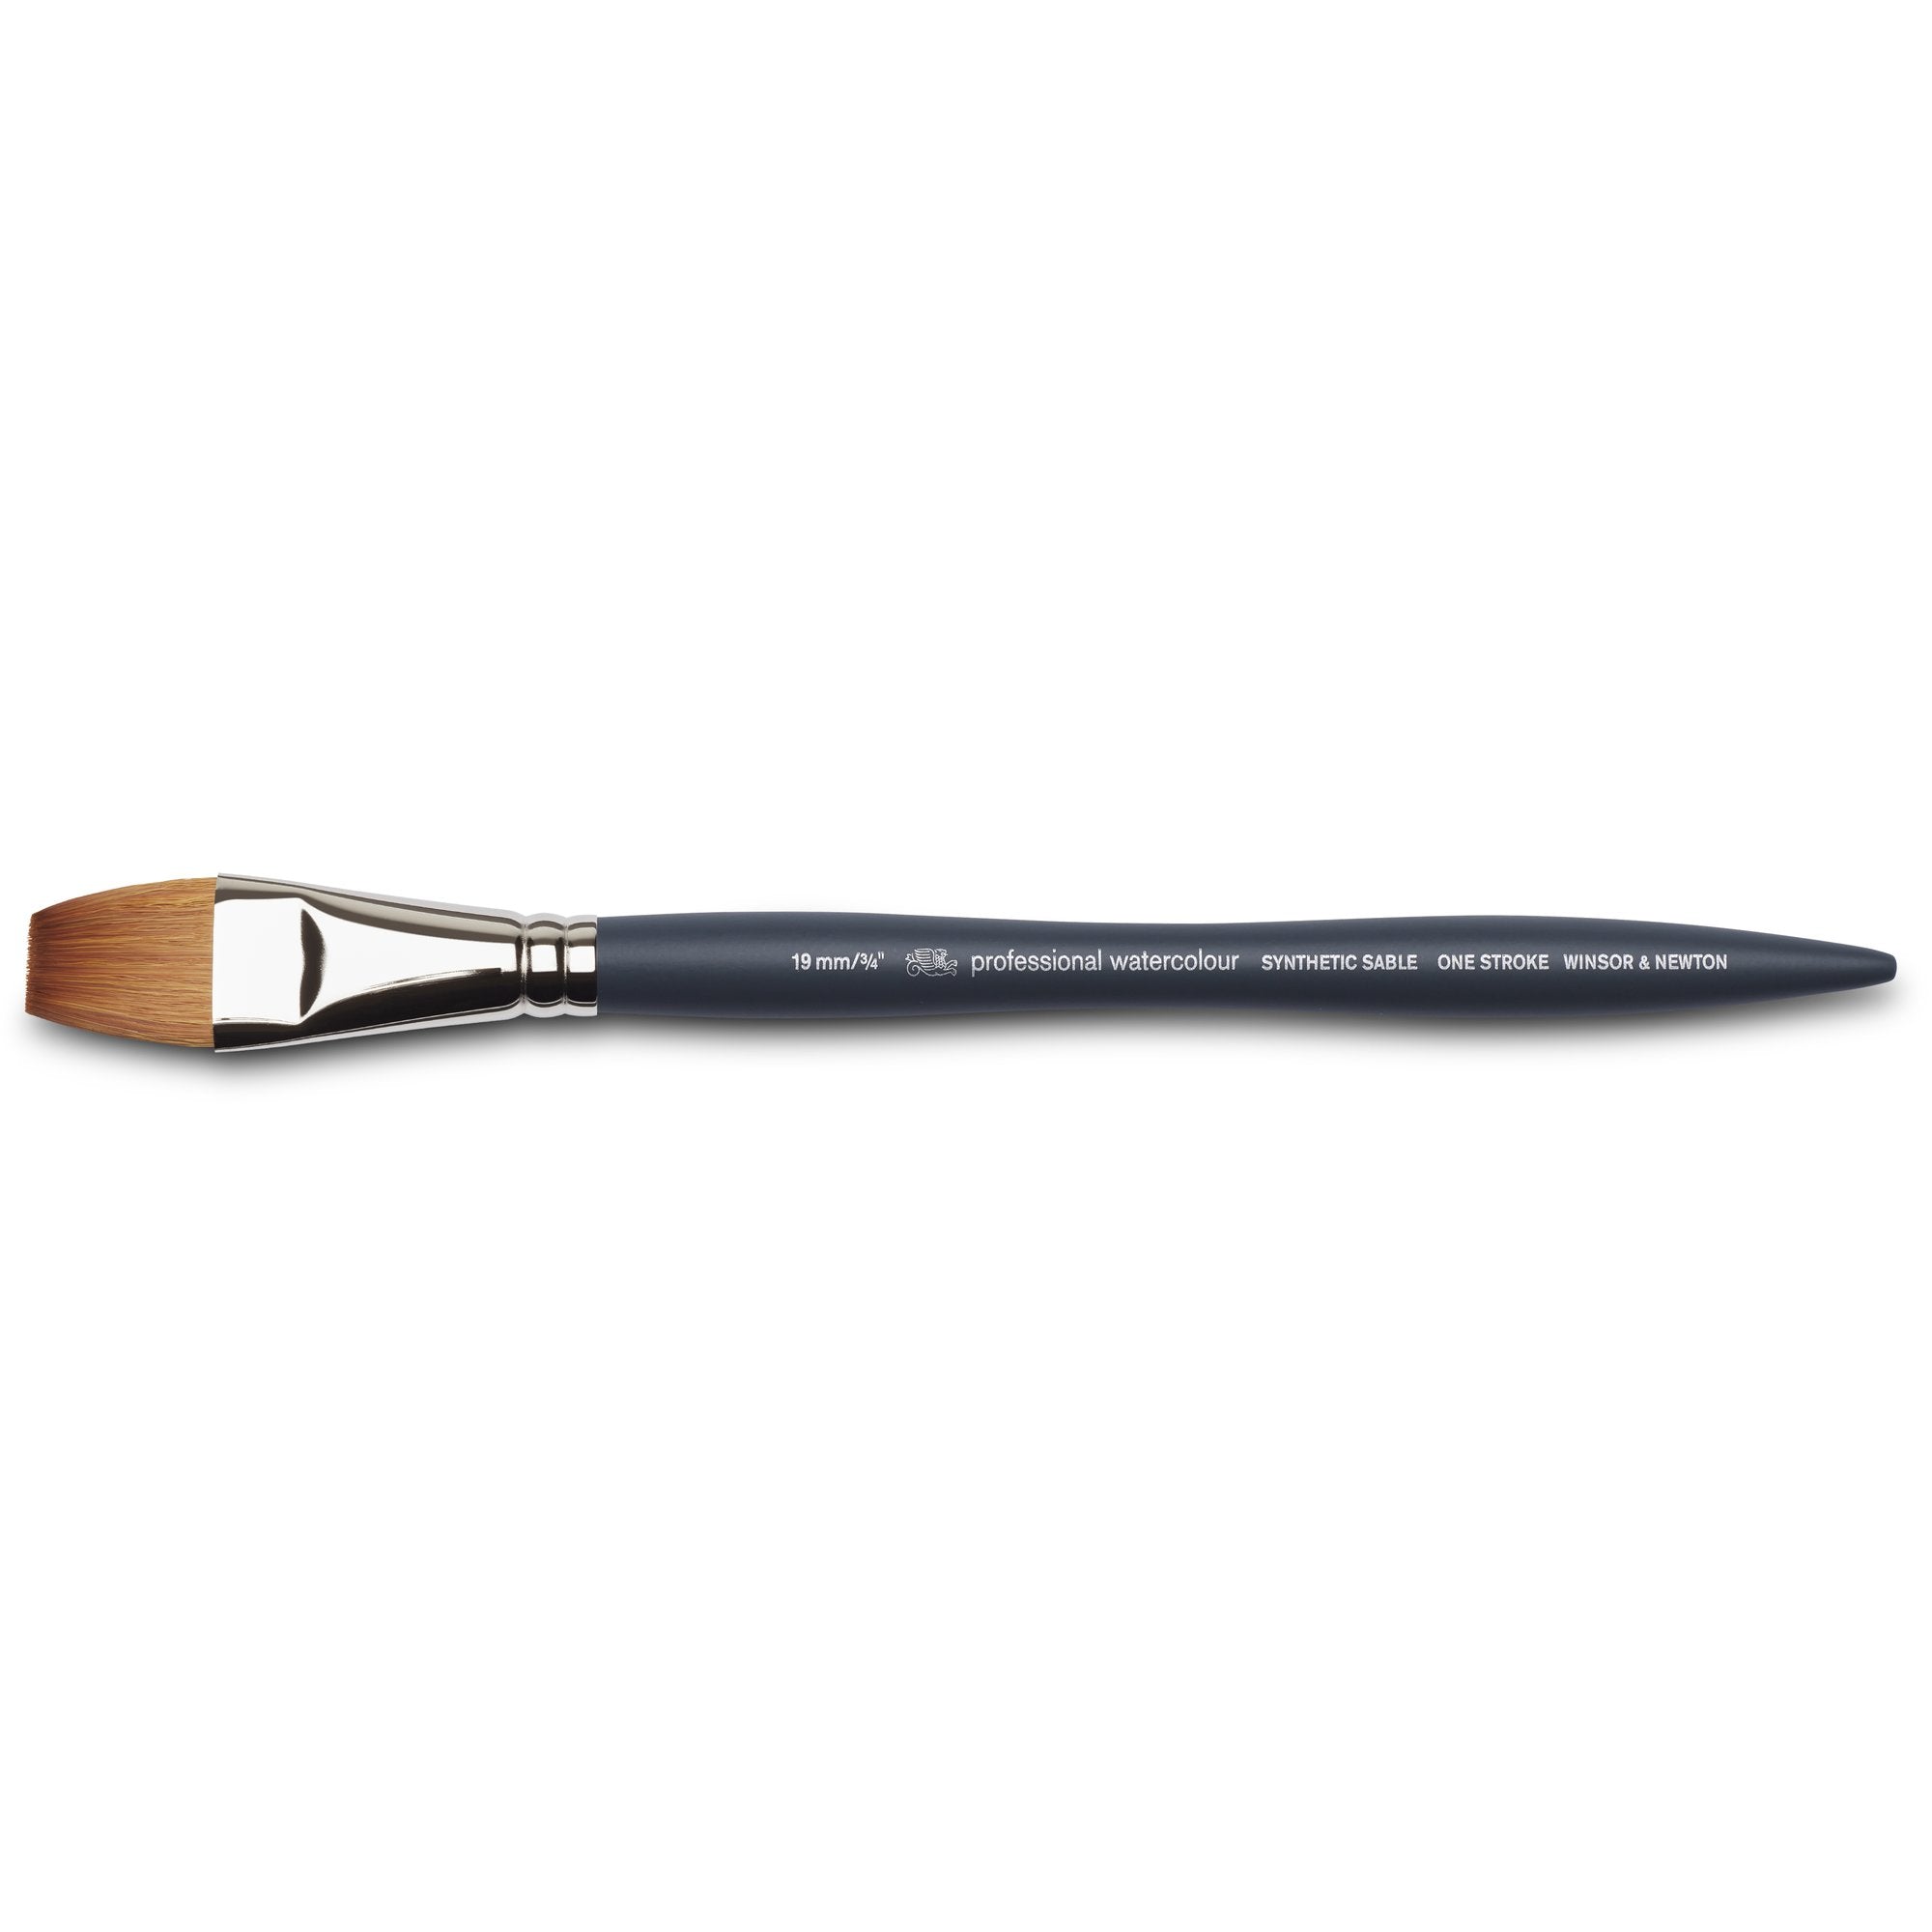 Winsor & Newton Professional Watercolour Synthetic Sable Brush one stroke 3/4 Inch